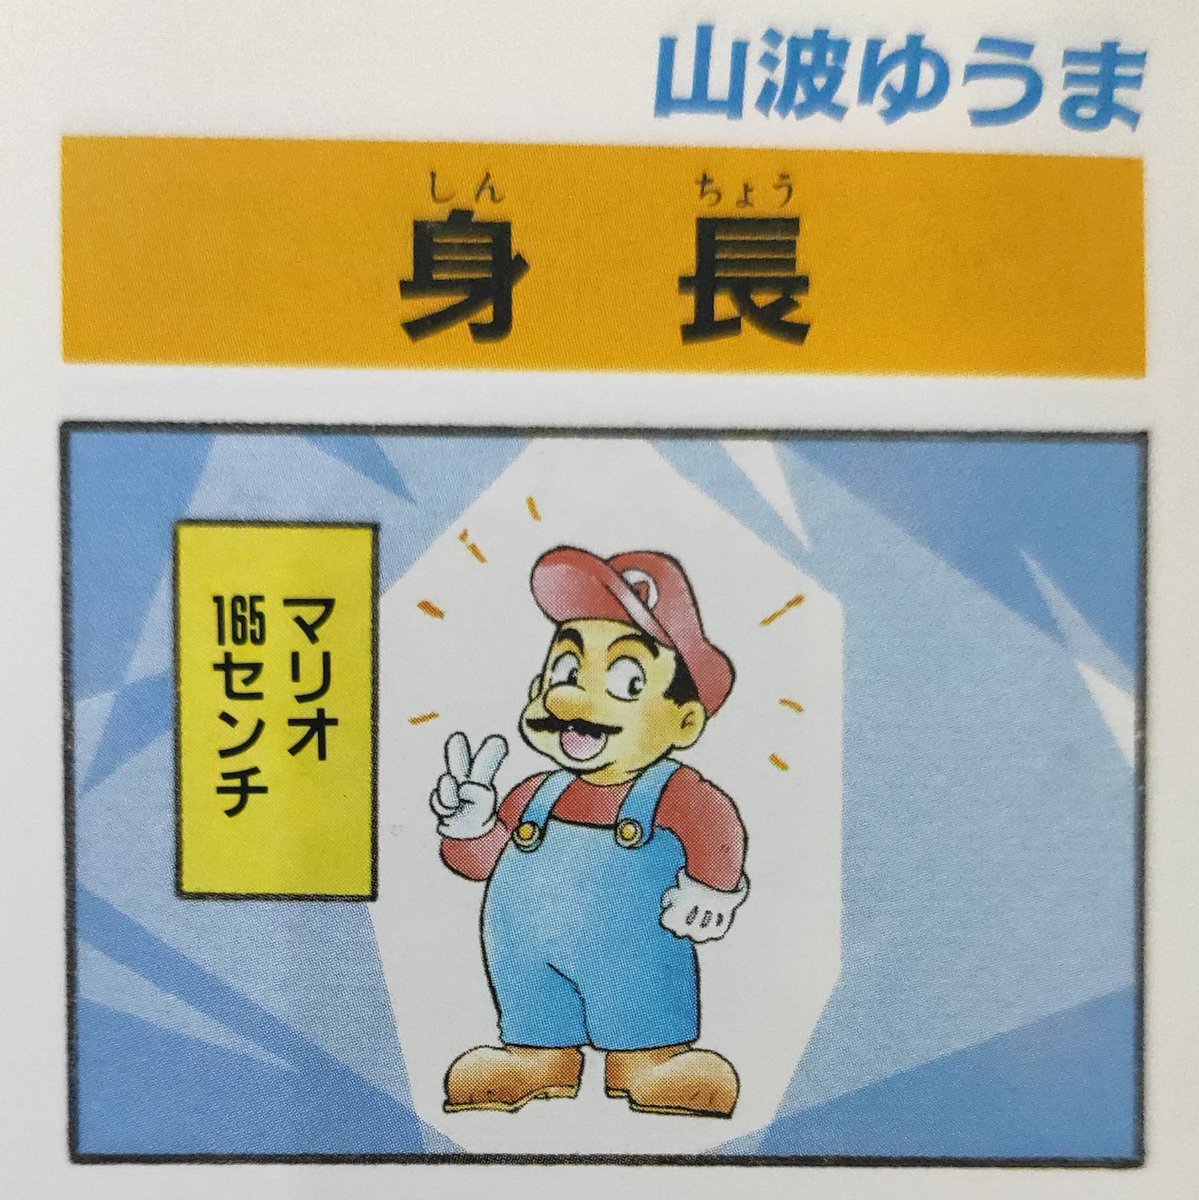 According to this manga Mario is 165cm (65inch) tall and Luigi is 180cm (70inch), while Peach is 360cm (142inch)!!!! 